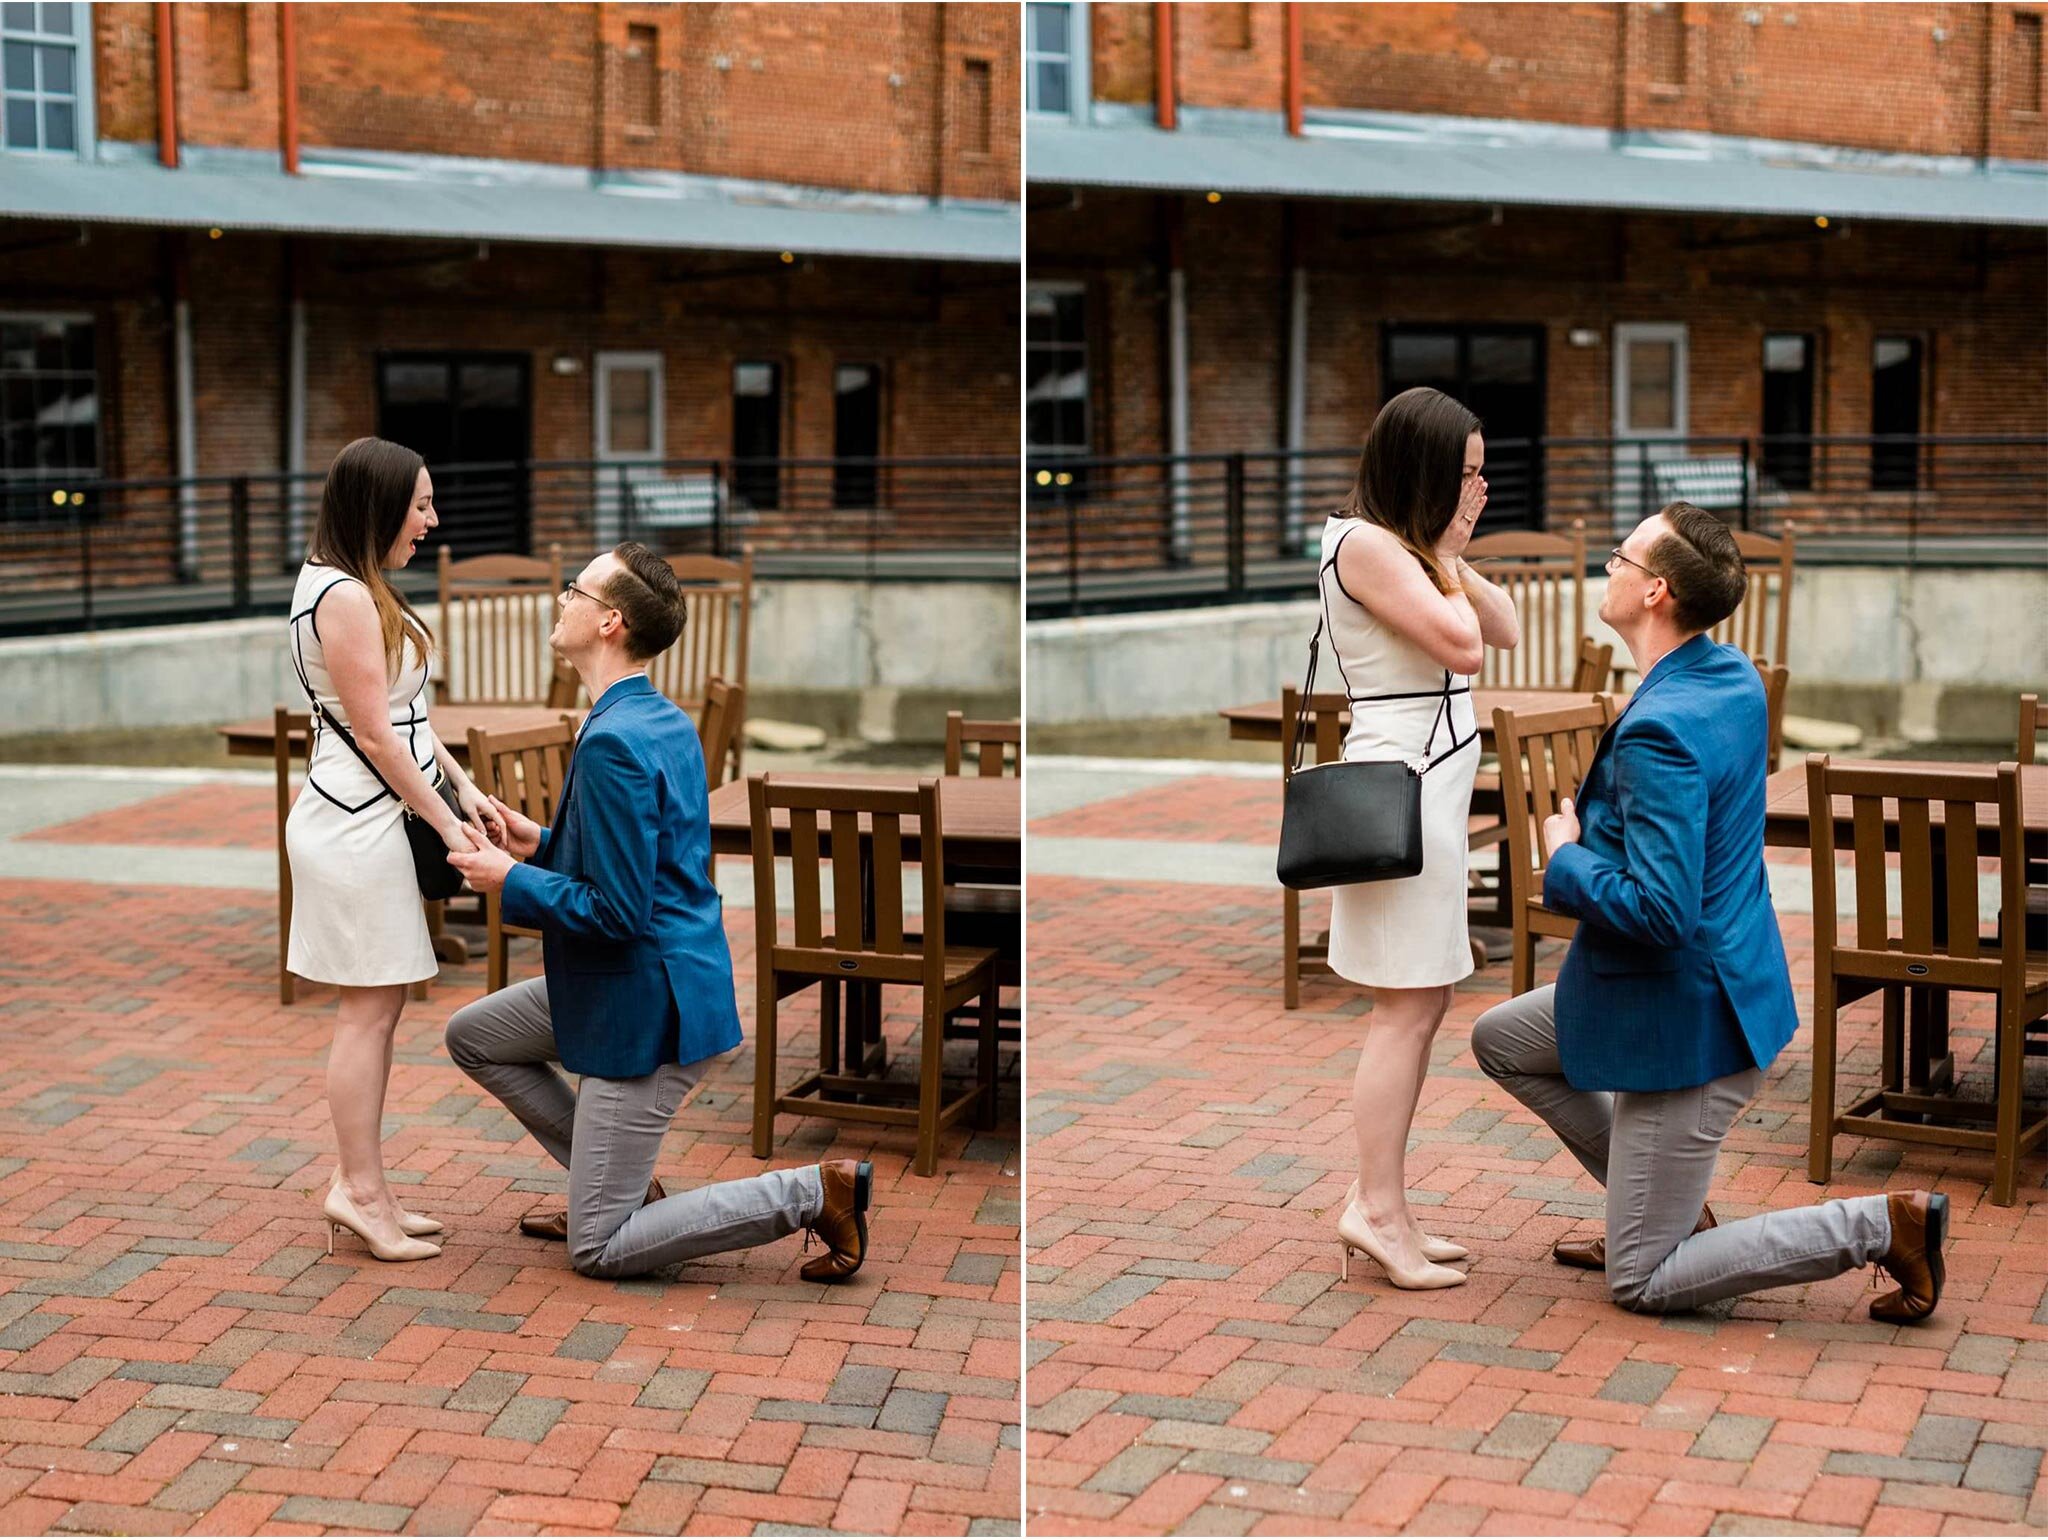 Durham Engagement Photographer | By G. Lin Photography | Man proposing to woman at American Tobacco Campus